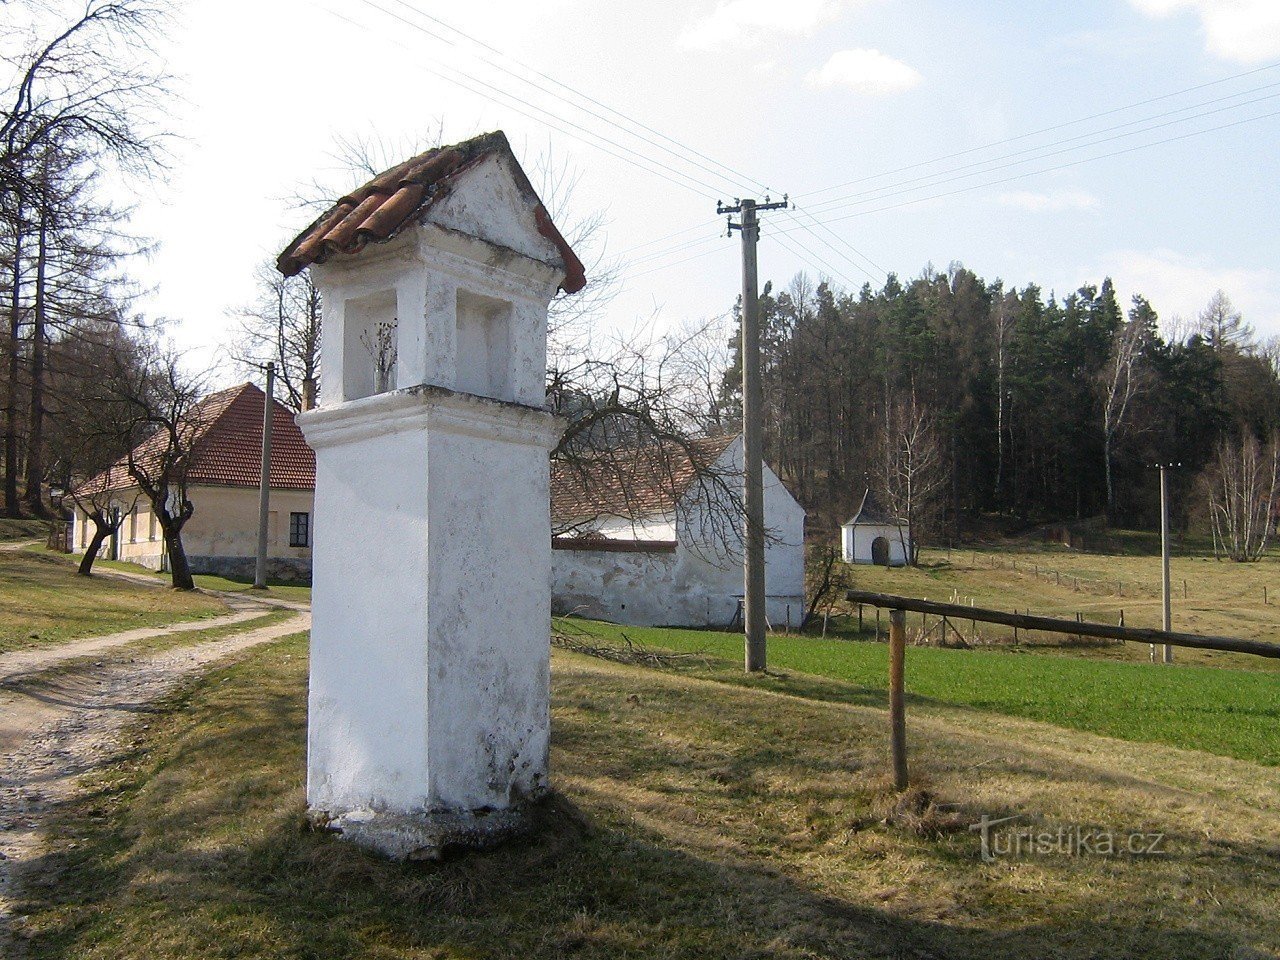 A small chapel in the background hides a healing spring